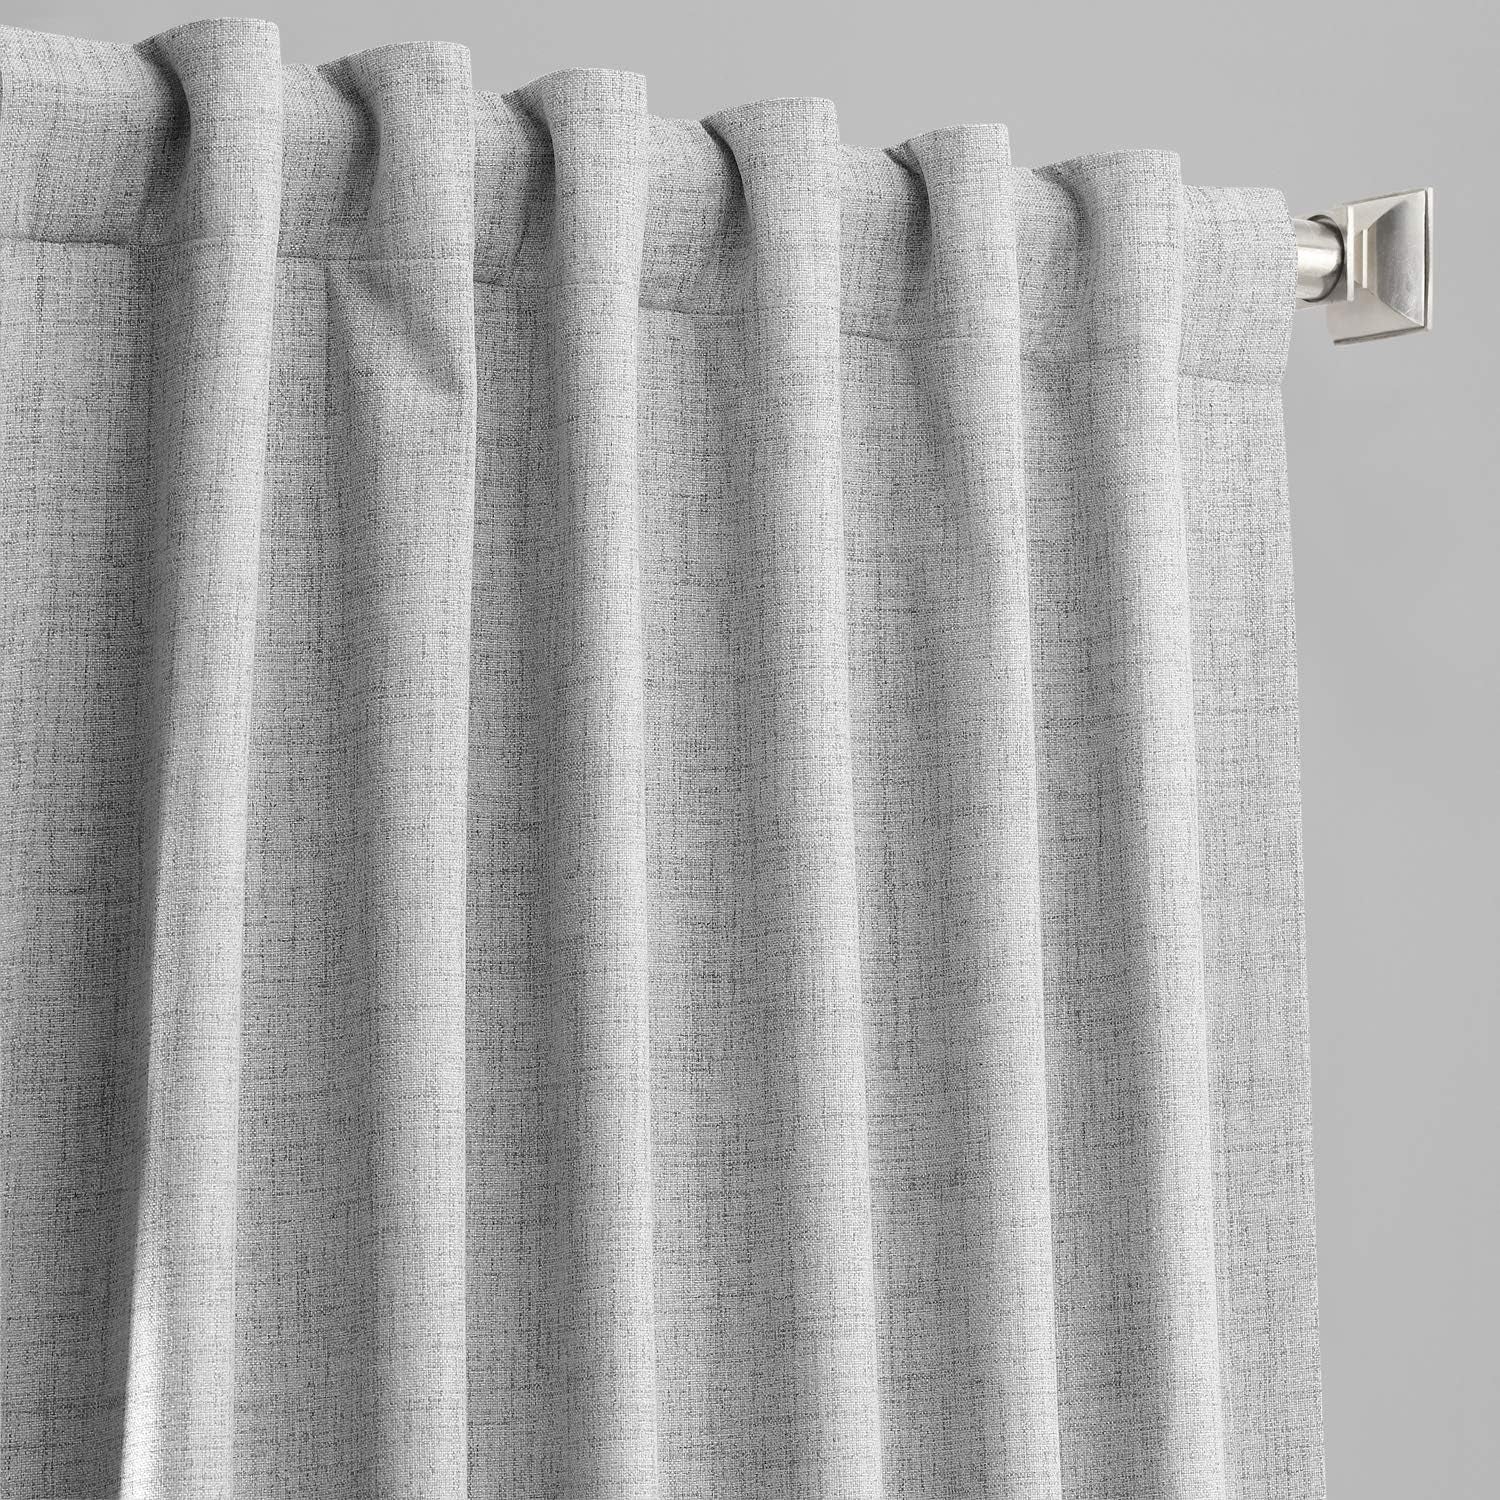 HPD Half Price Drapes Vintage Blackout Curtains for Bedroom - 96 Inches Long Thermal Cross Linen Weave Full Light Blocking 1 Panel Blackout Curtain, (50W X 96L), Millennial Grey  Exclusive Fabrics & Furnishings   